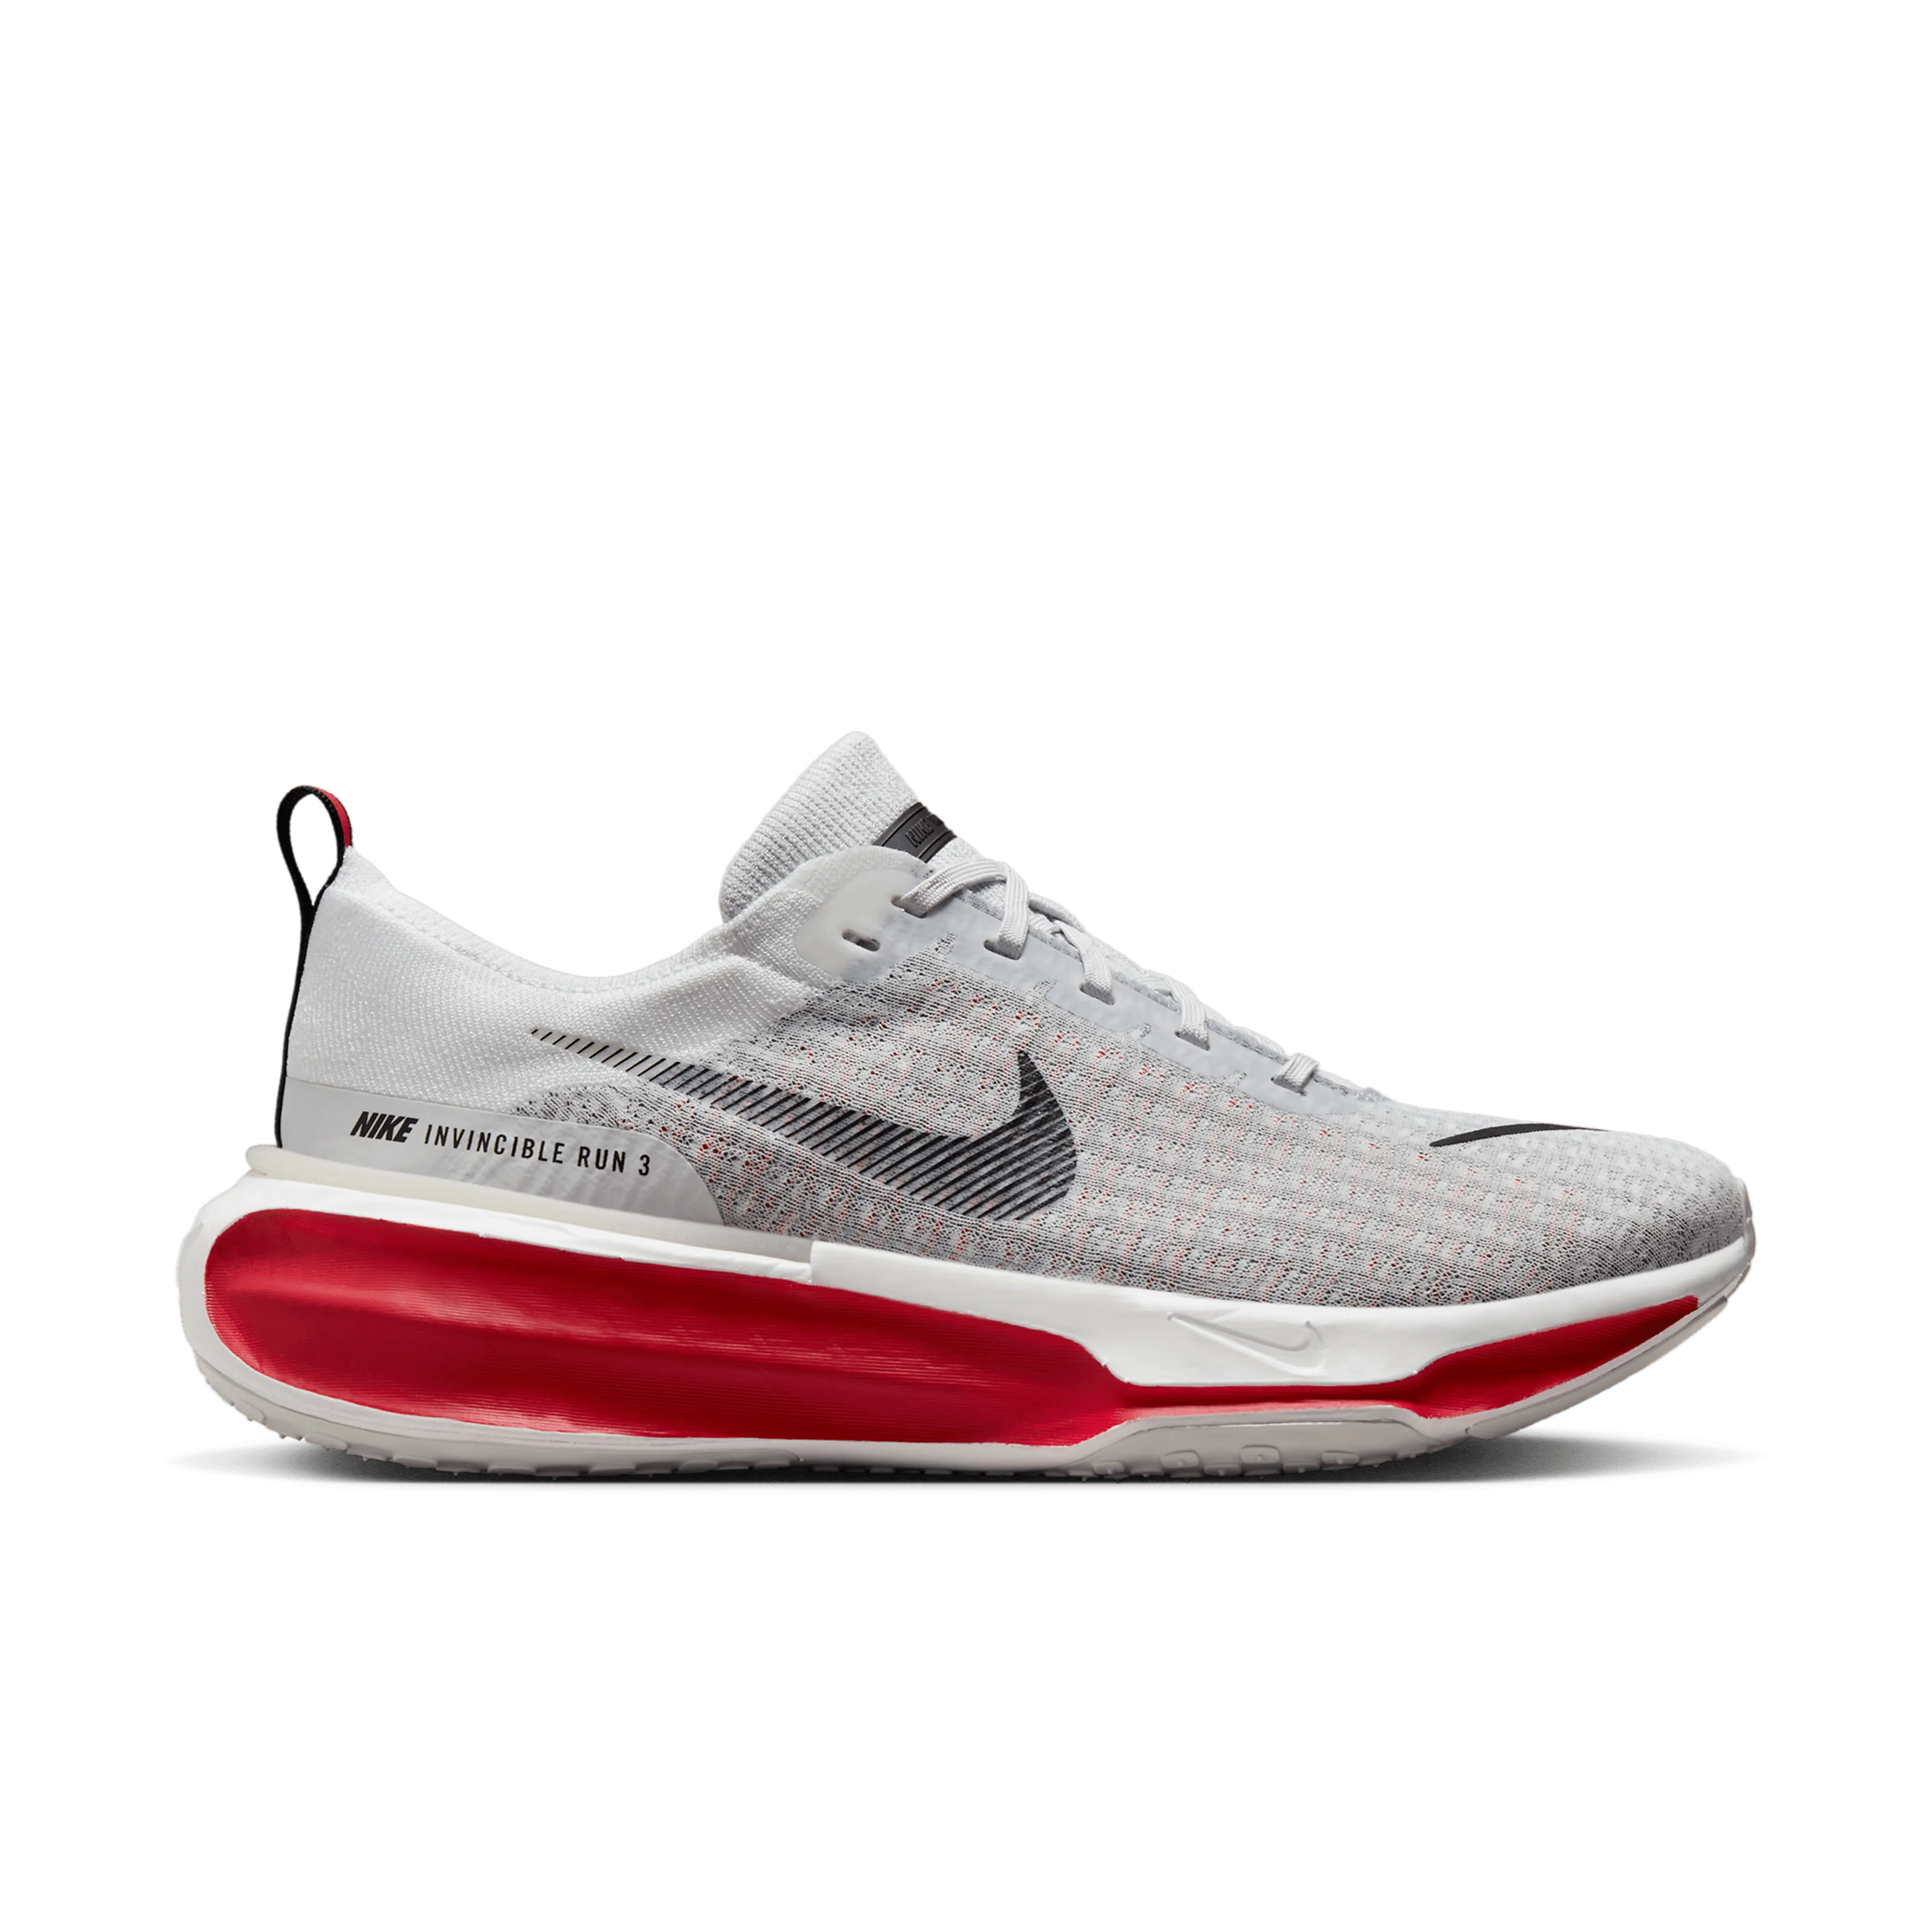 WHITE/BLACK-FIRE RED-CEMENT GREY